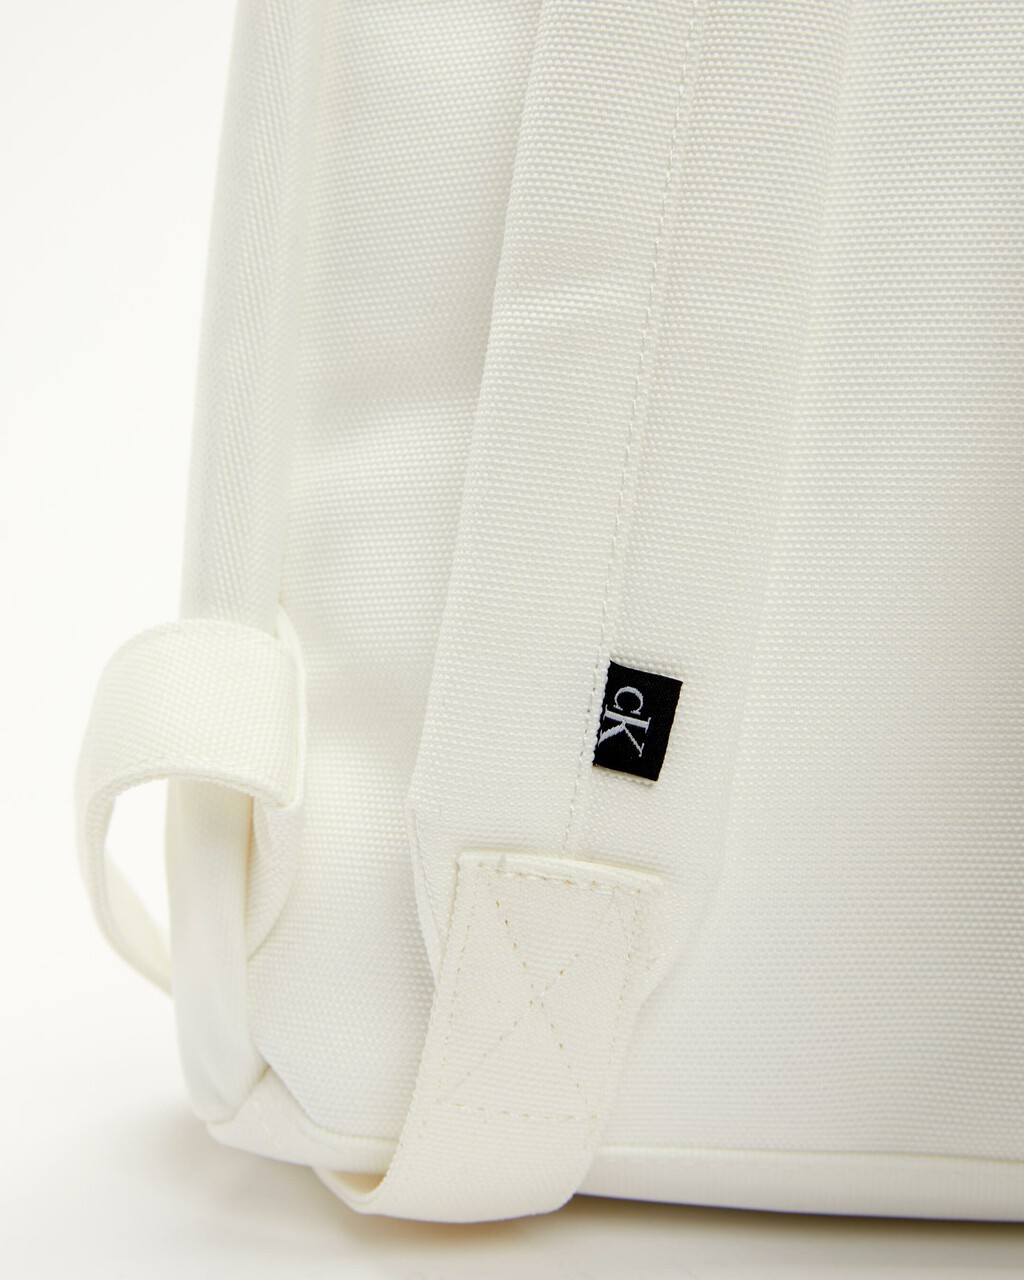 COLOR BLOCK INSTITUTIONAL ROUND BACKPACK, BRIGHT WHITE, hi-res